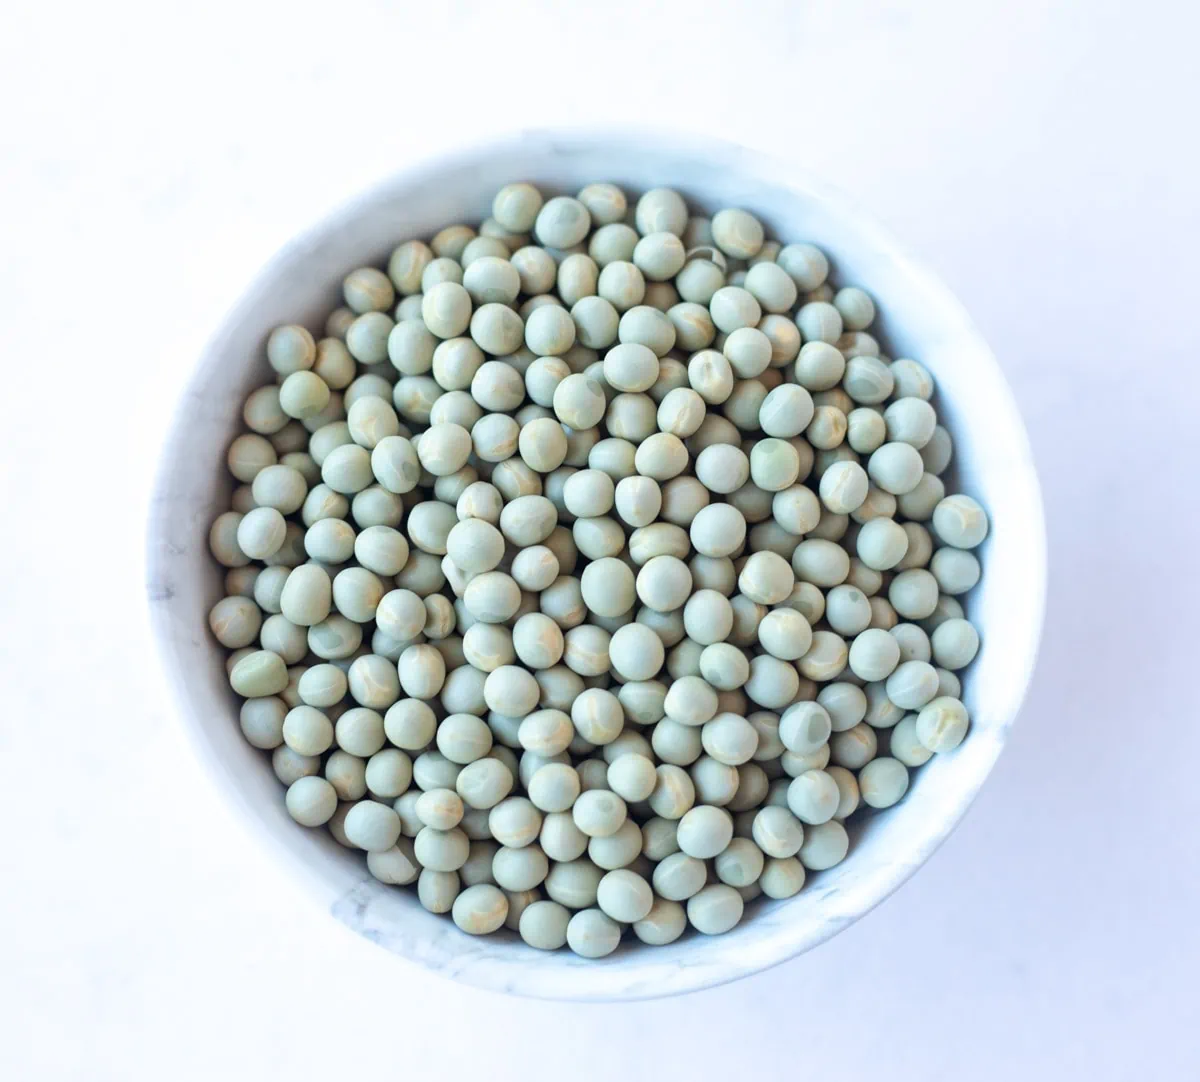 Dried Green Peas, also called Vatana in a white bowl 